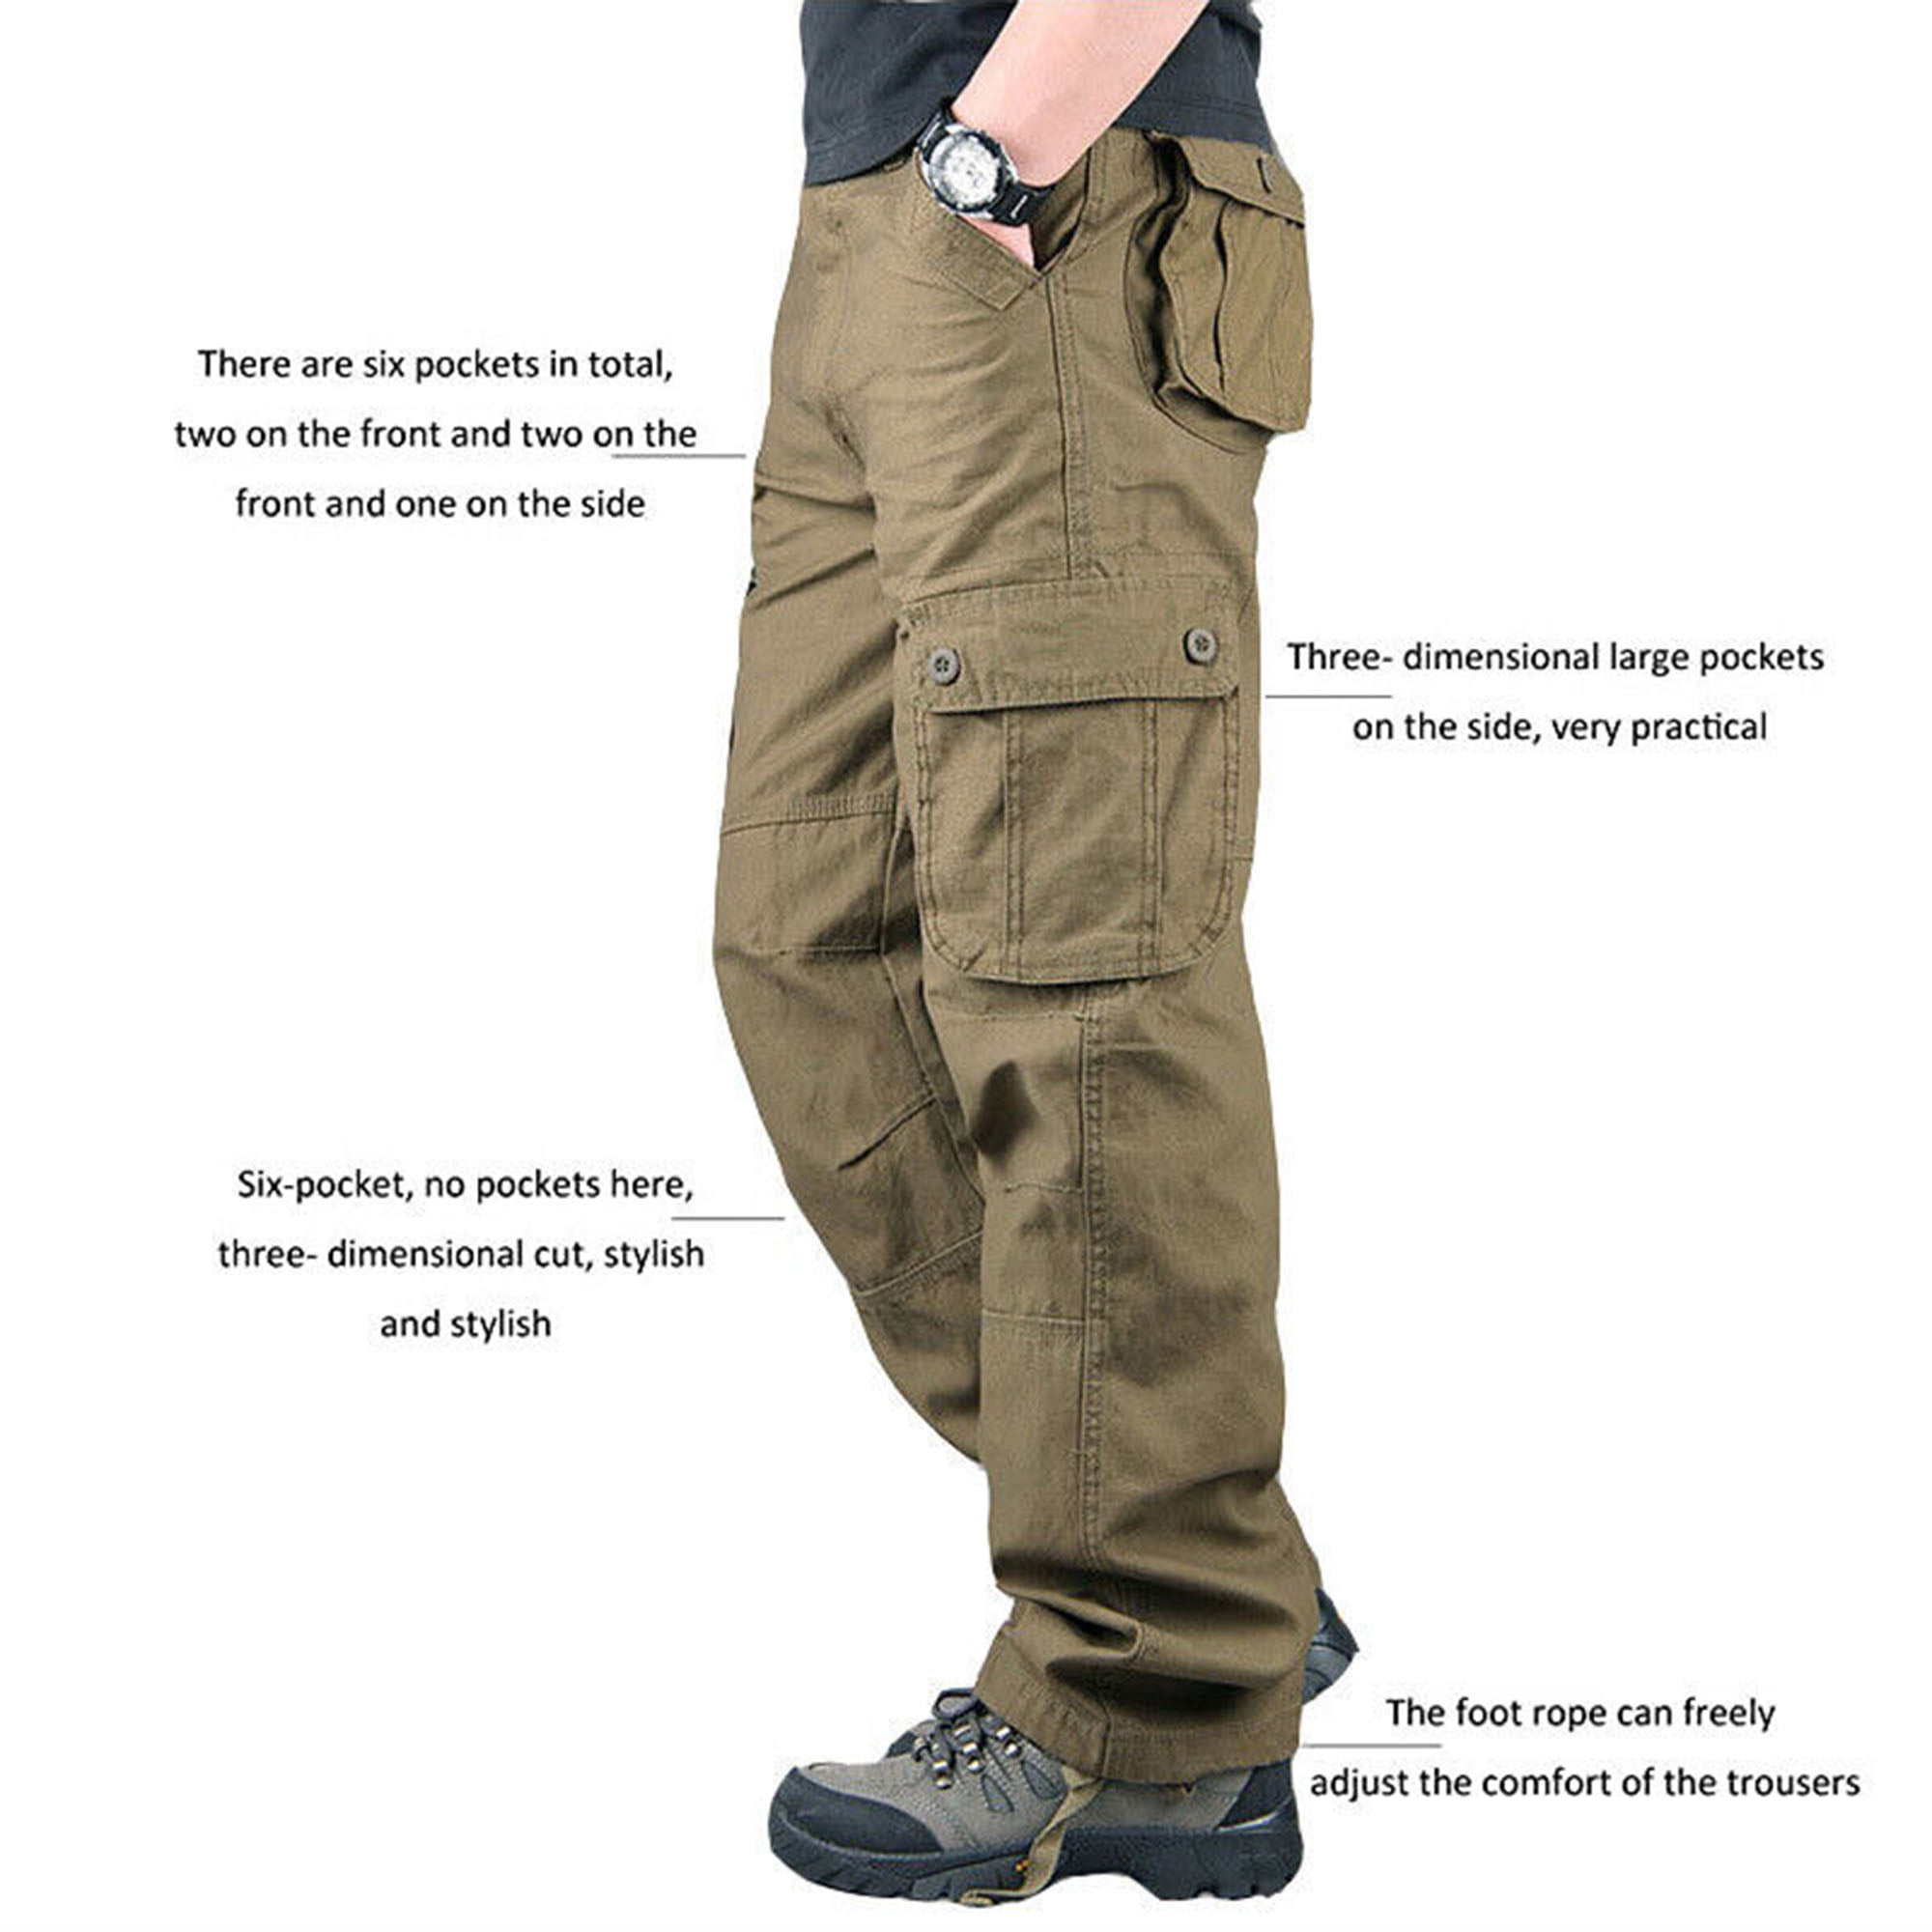 YouLoveIt Men's Casual Military Pants Camo Cargo Work Pants Trousers  Multi-Pocket Pants Casual Military Army Hiking Tactical Work Pants,6/8  pockets